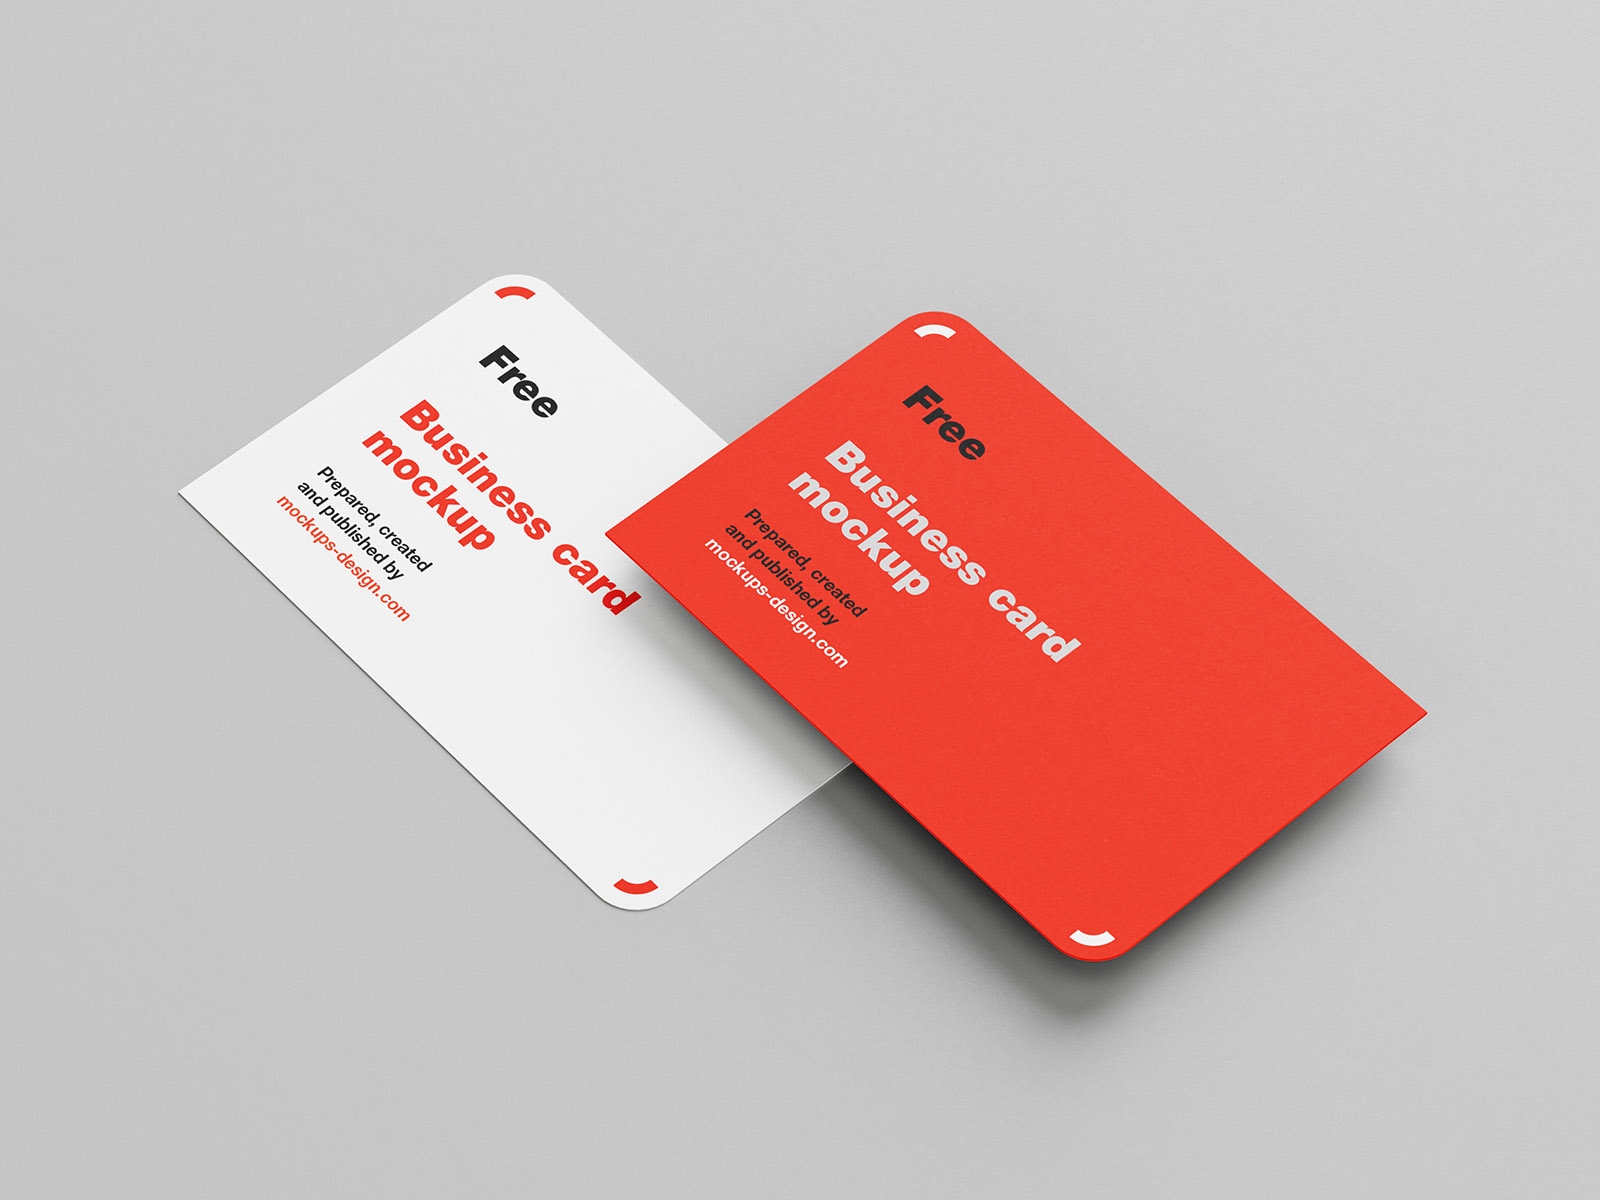 6 Mockups of Rounded Corner Business Card from Different Angles FREE PSD